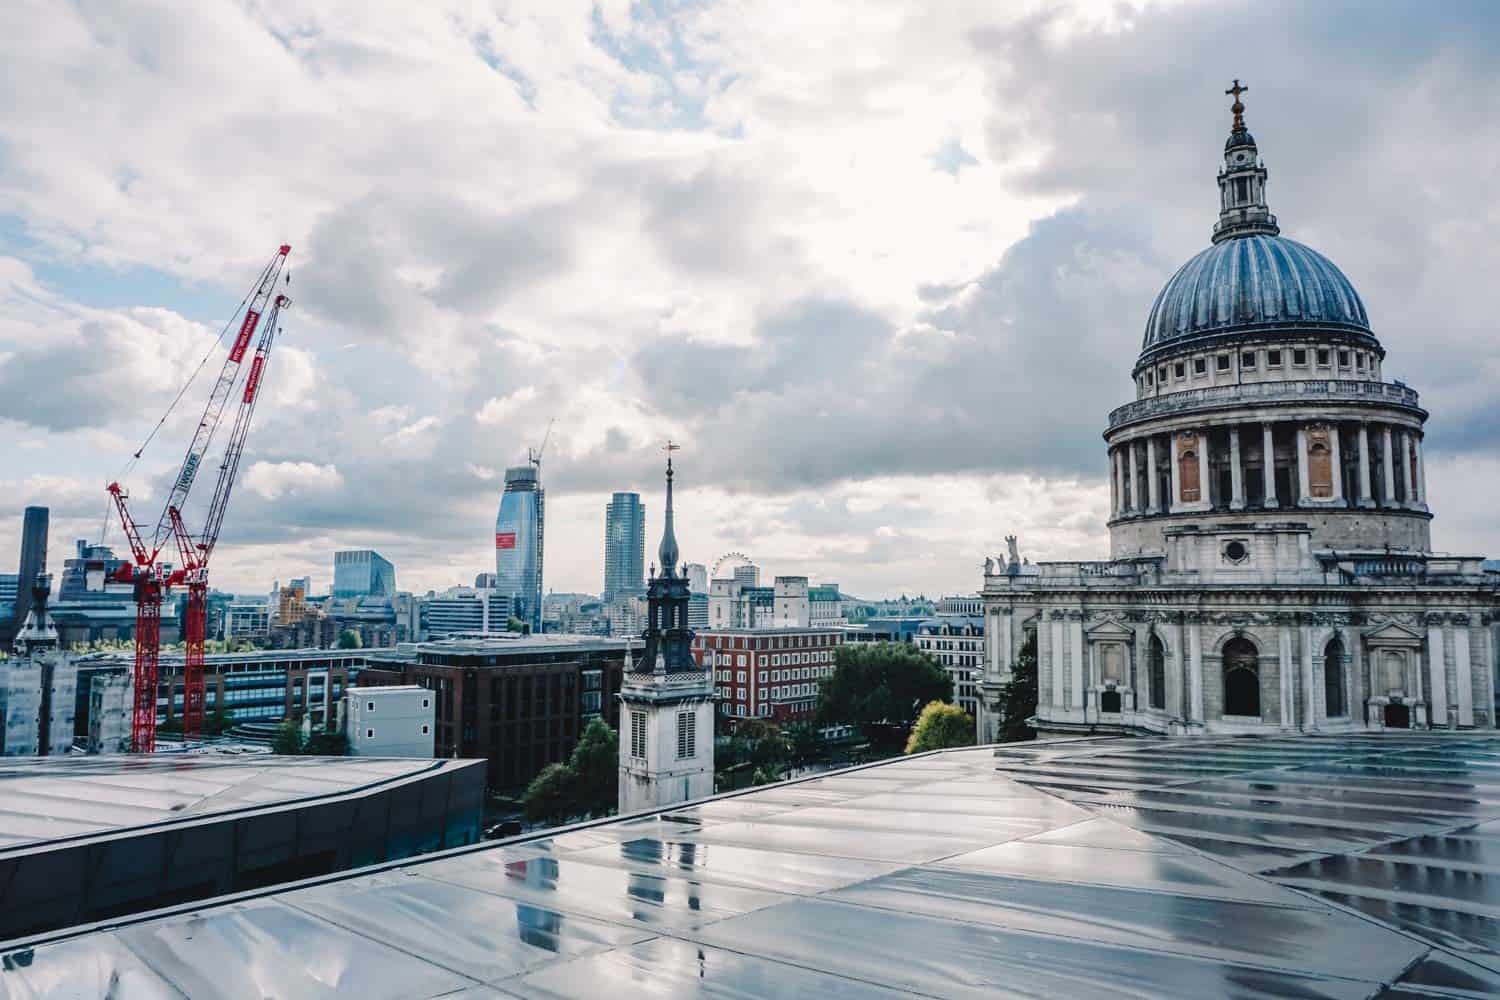 The most instagrammable spots in London - photo locations in London